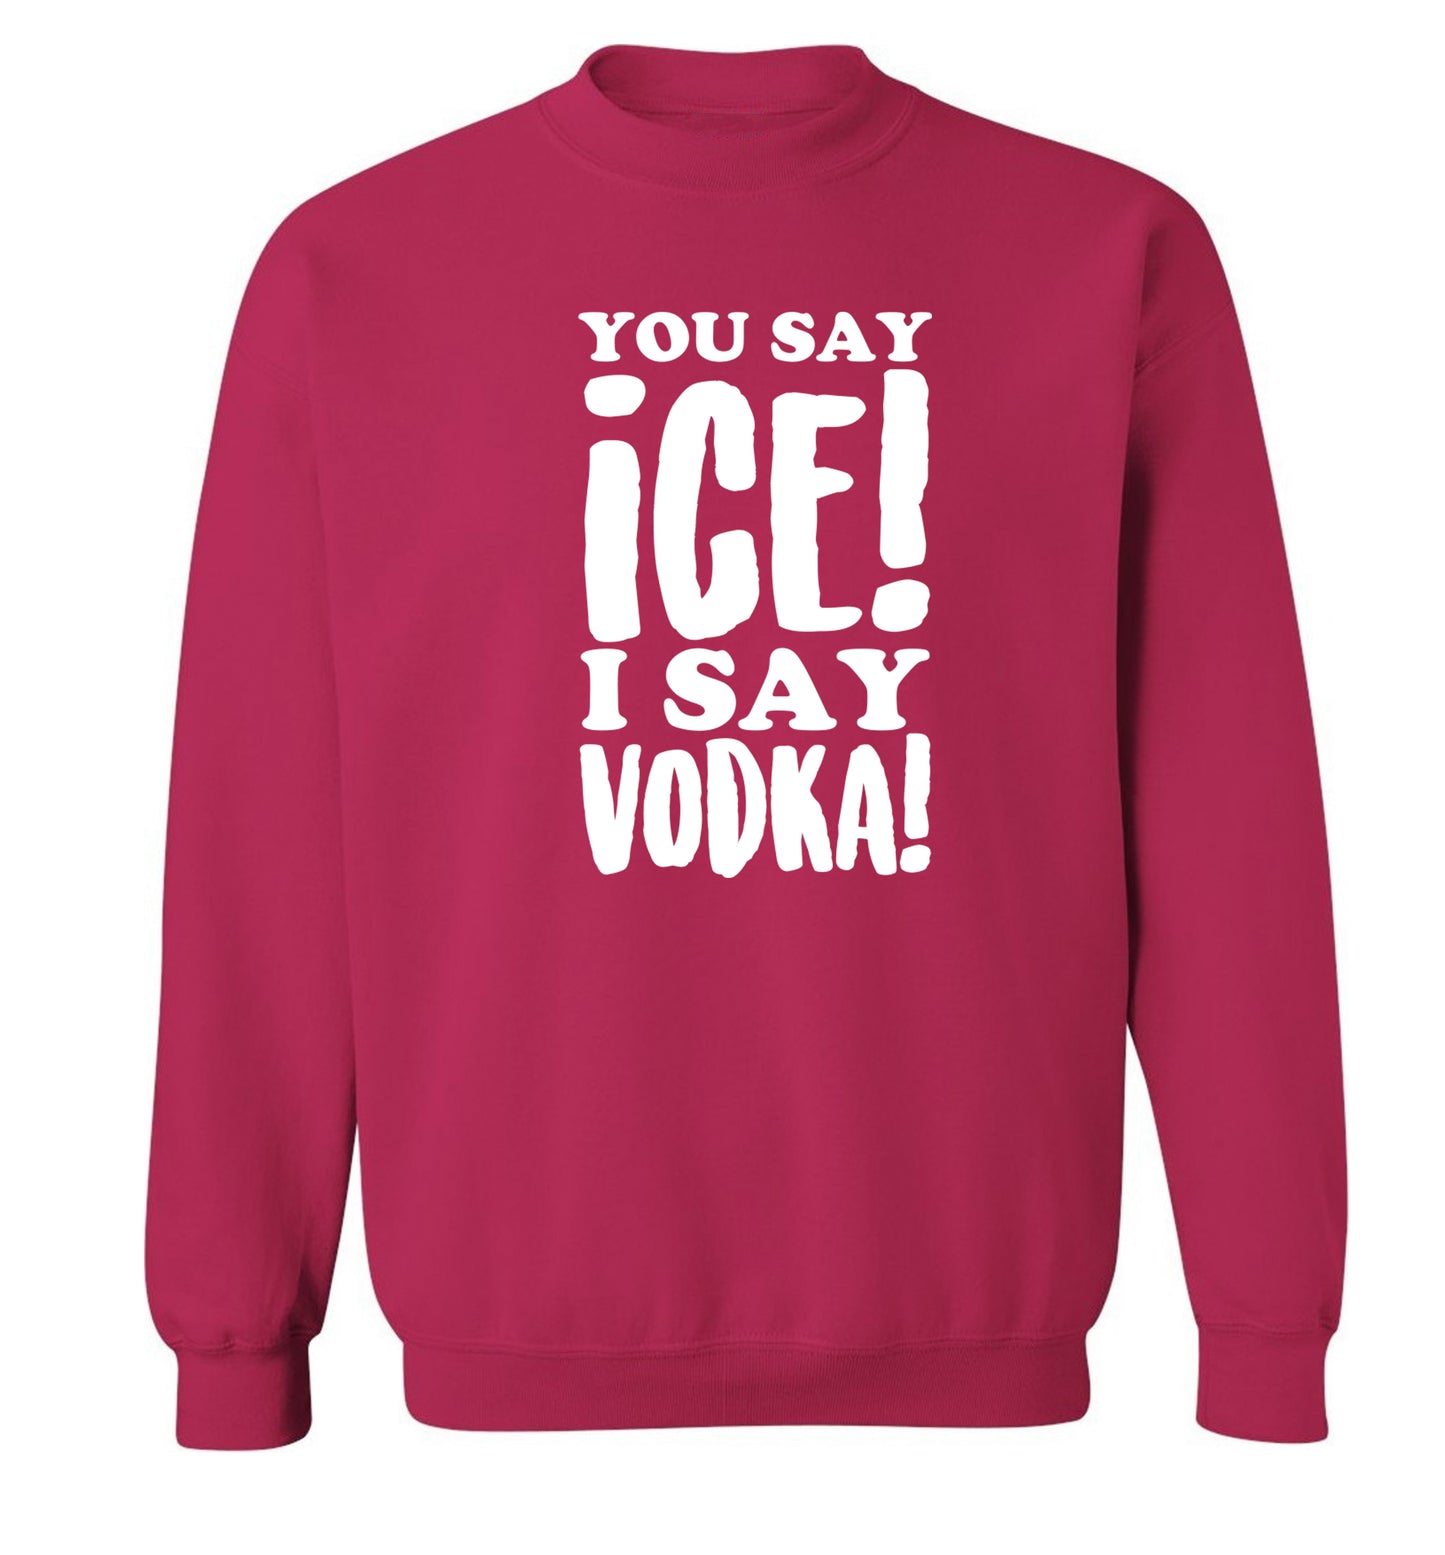 You say ice I say vodka! Adult's unisex pink Sweater 2XL